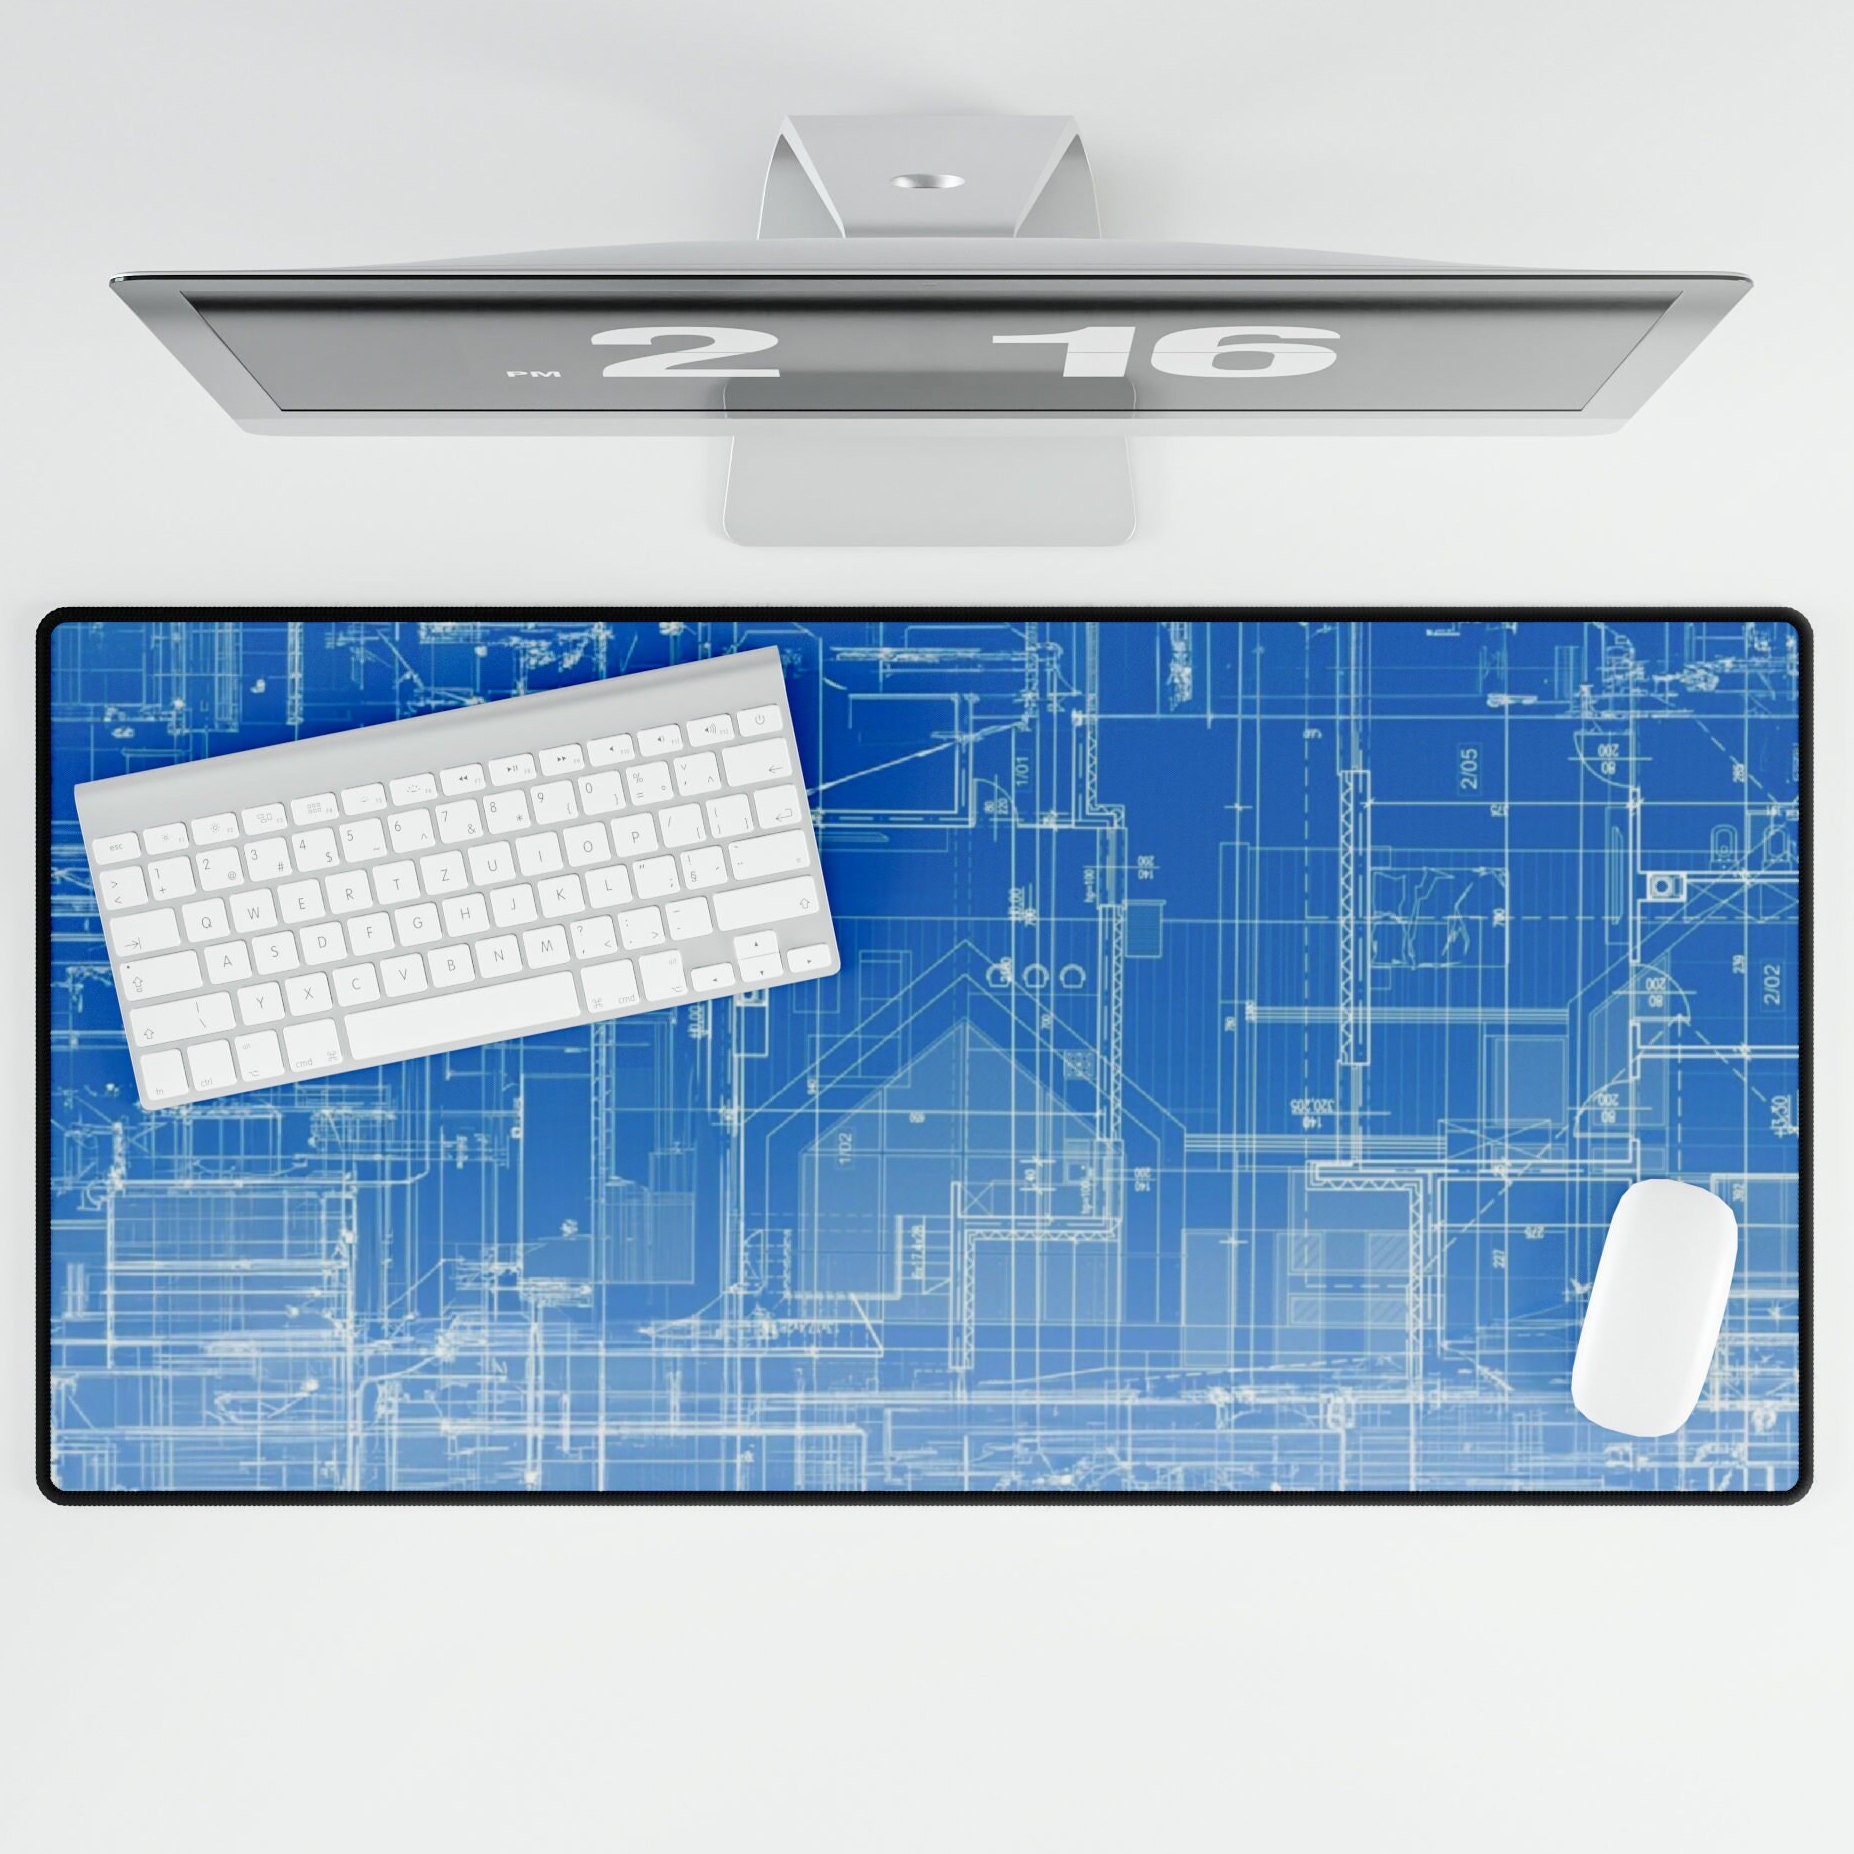 Grid Drafting Paper Desk Mat, White Engineer Gaming Large Mouse Pad XXL 